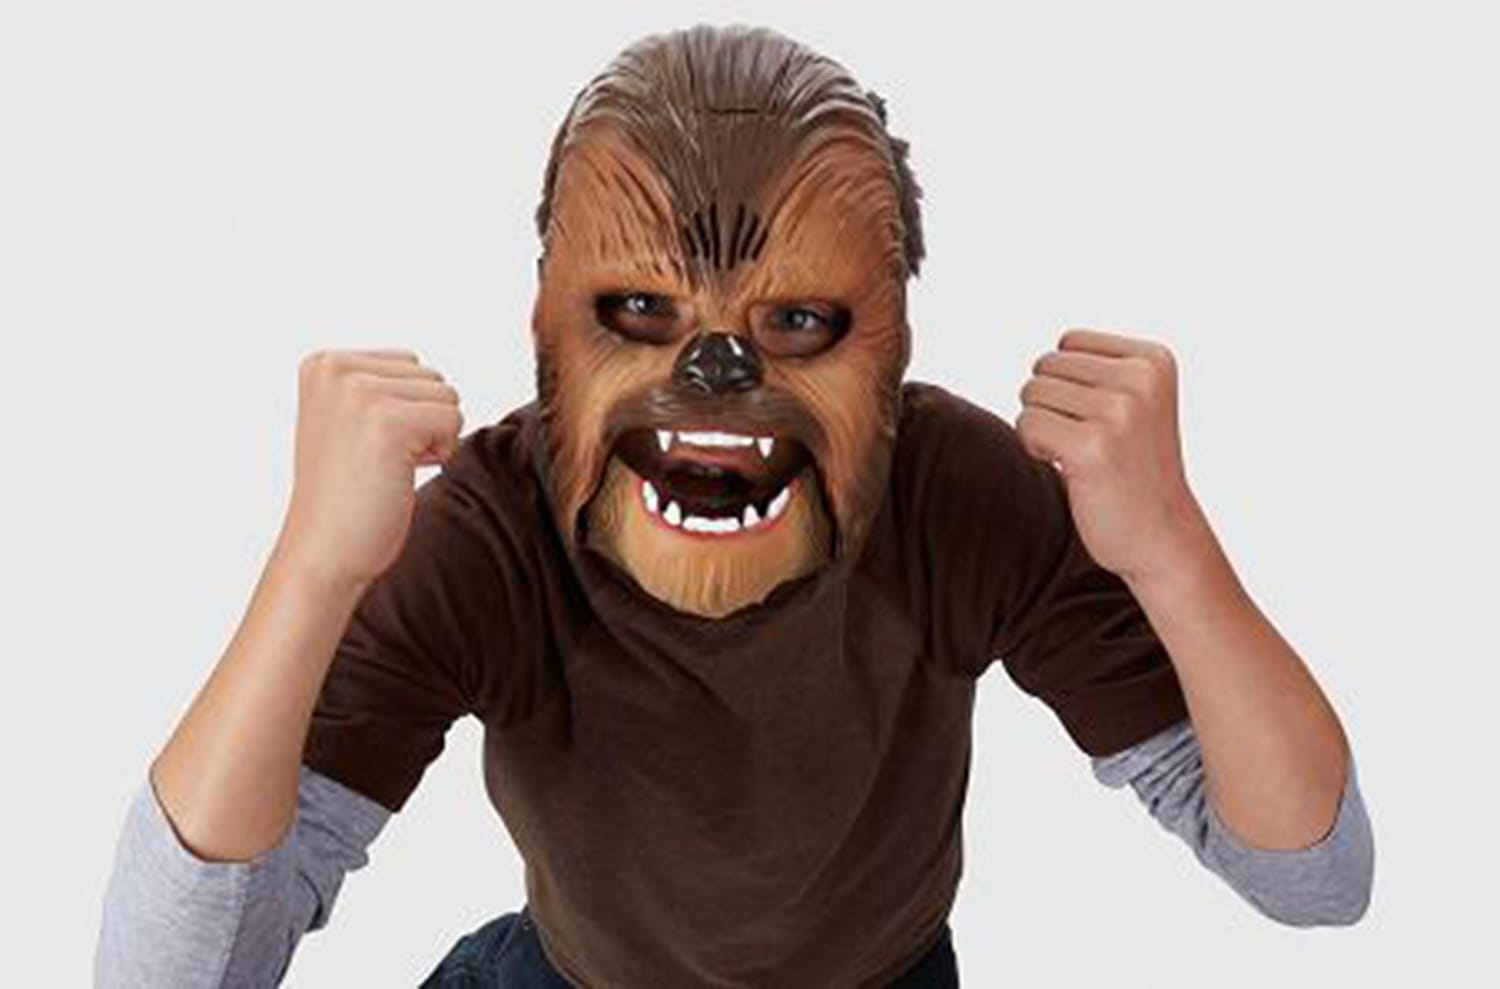 These Chewbacca Masks Selling for $500 on